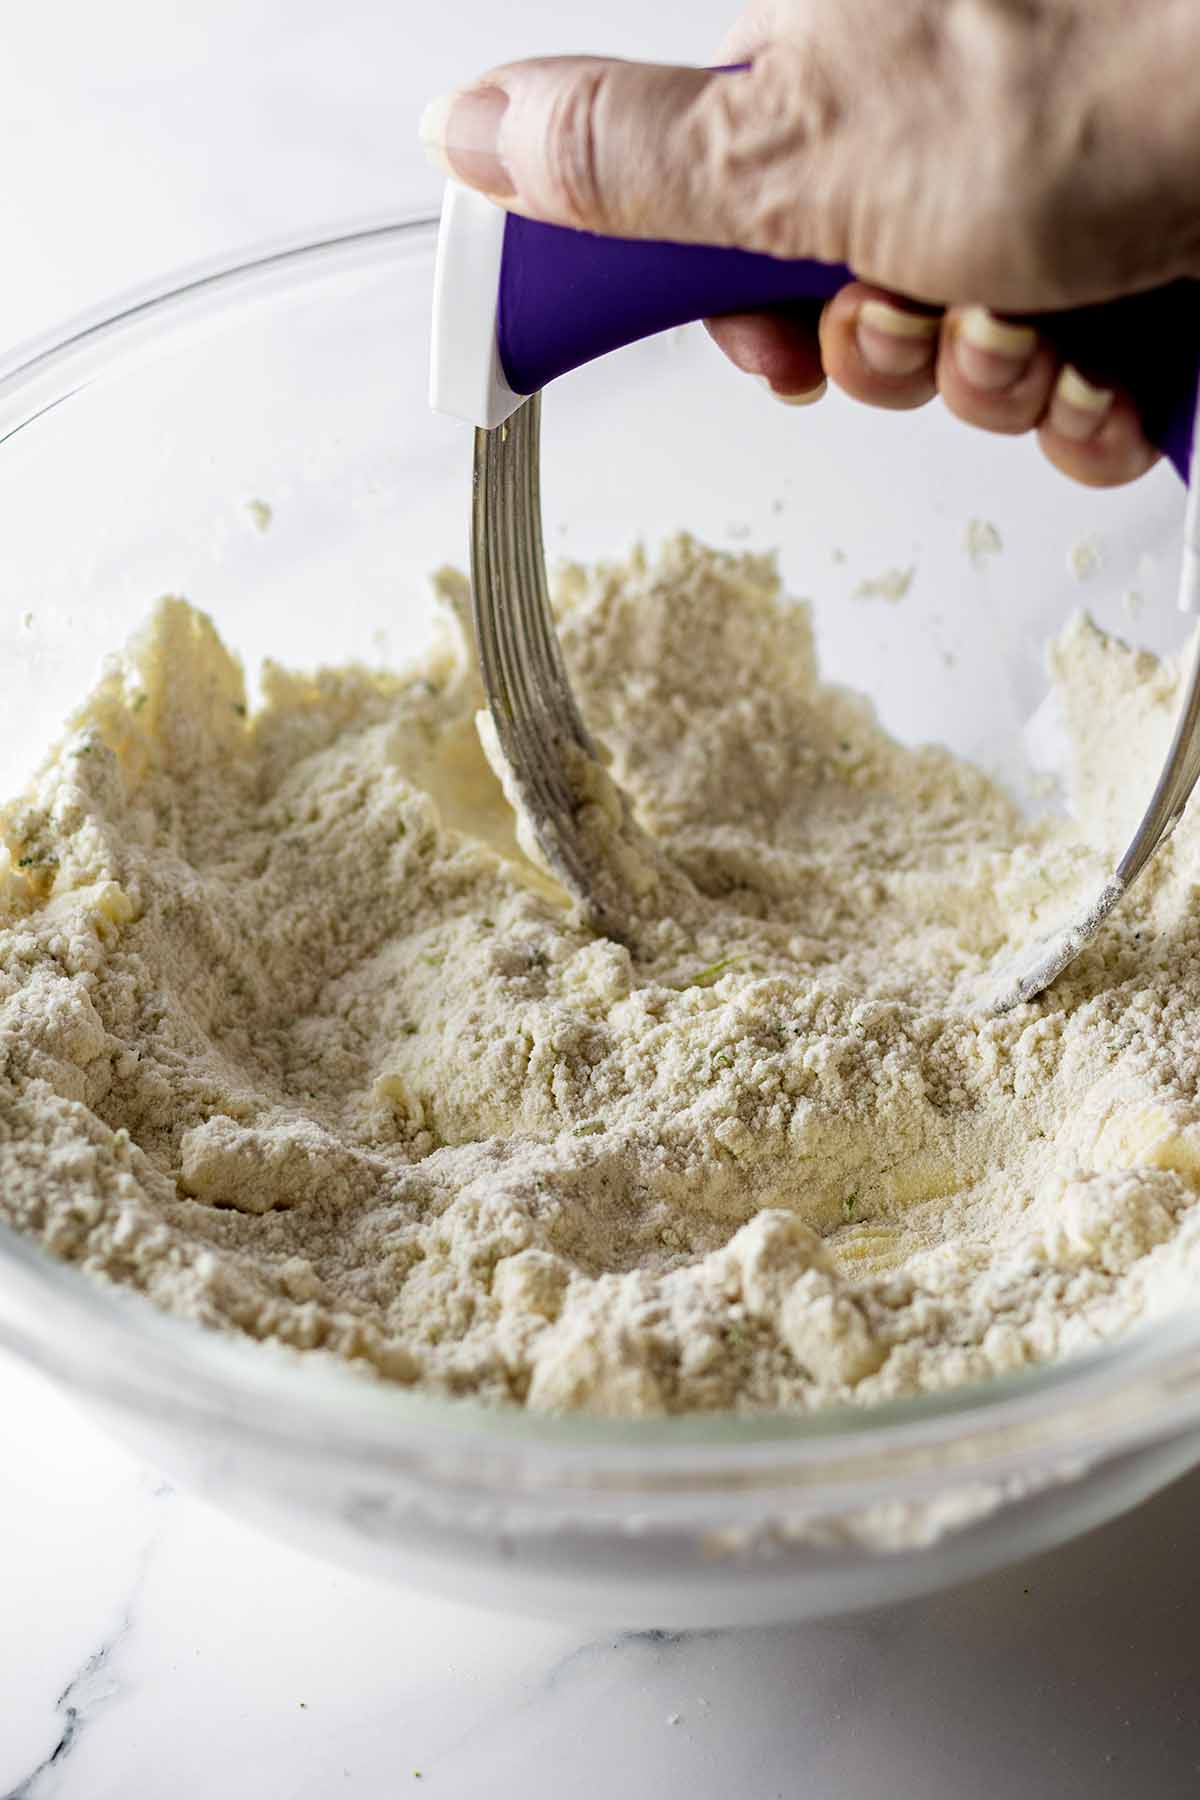 Mixing butter into dry ingredients with a pastry cutter